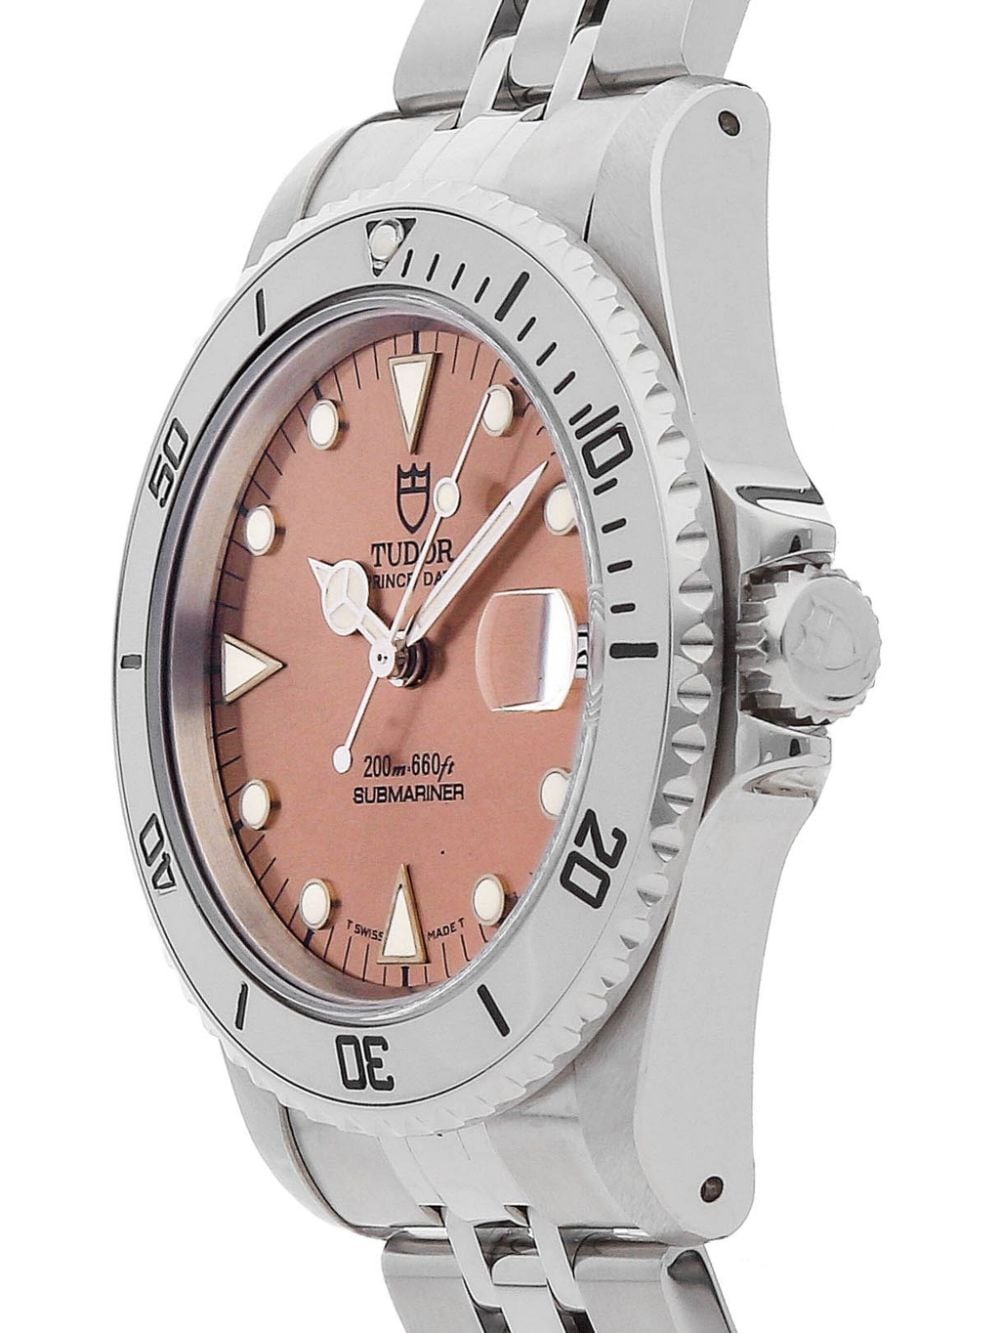 Image 2 of TUDOR pre-owned Submariner 75190 36mm